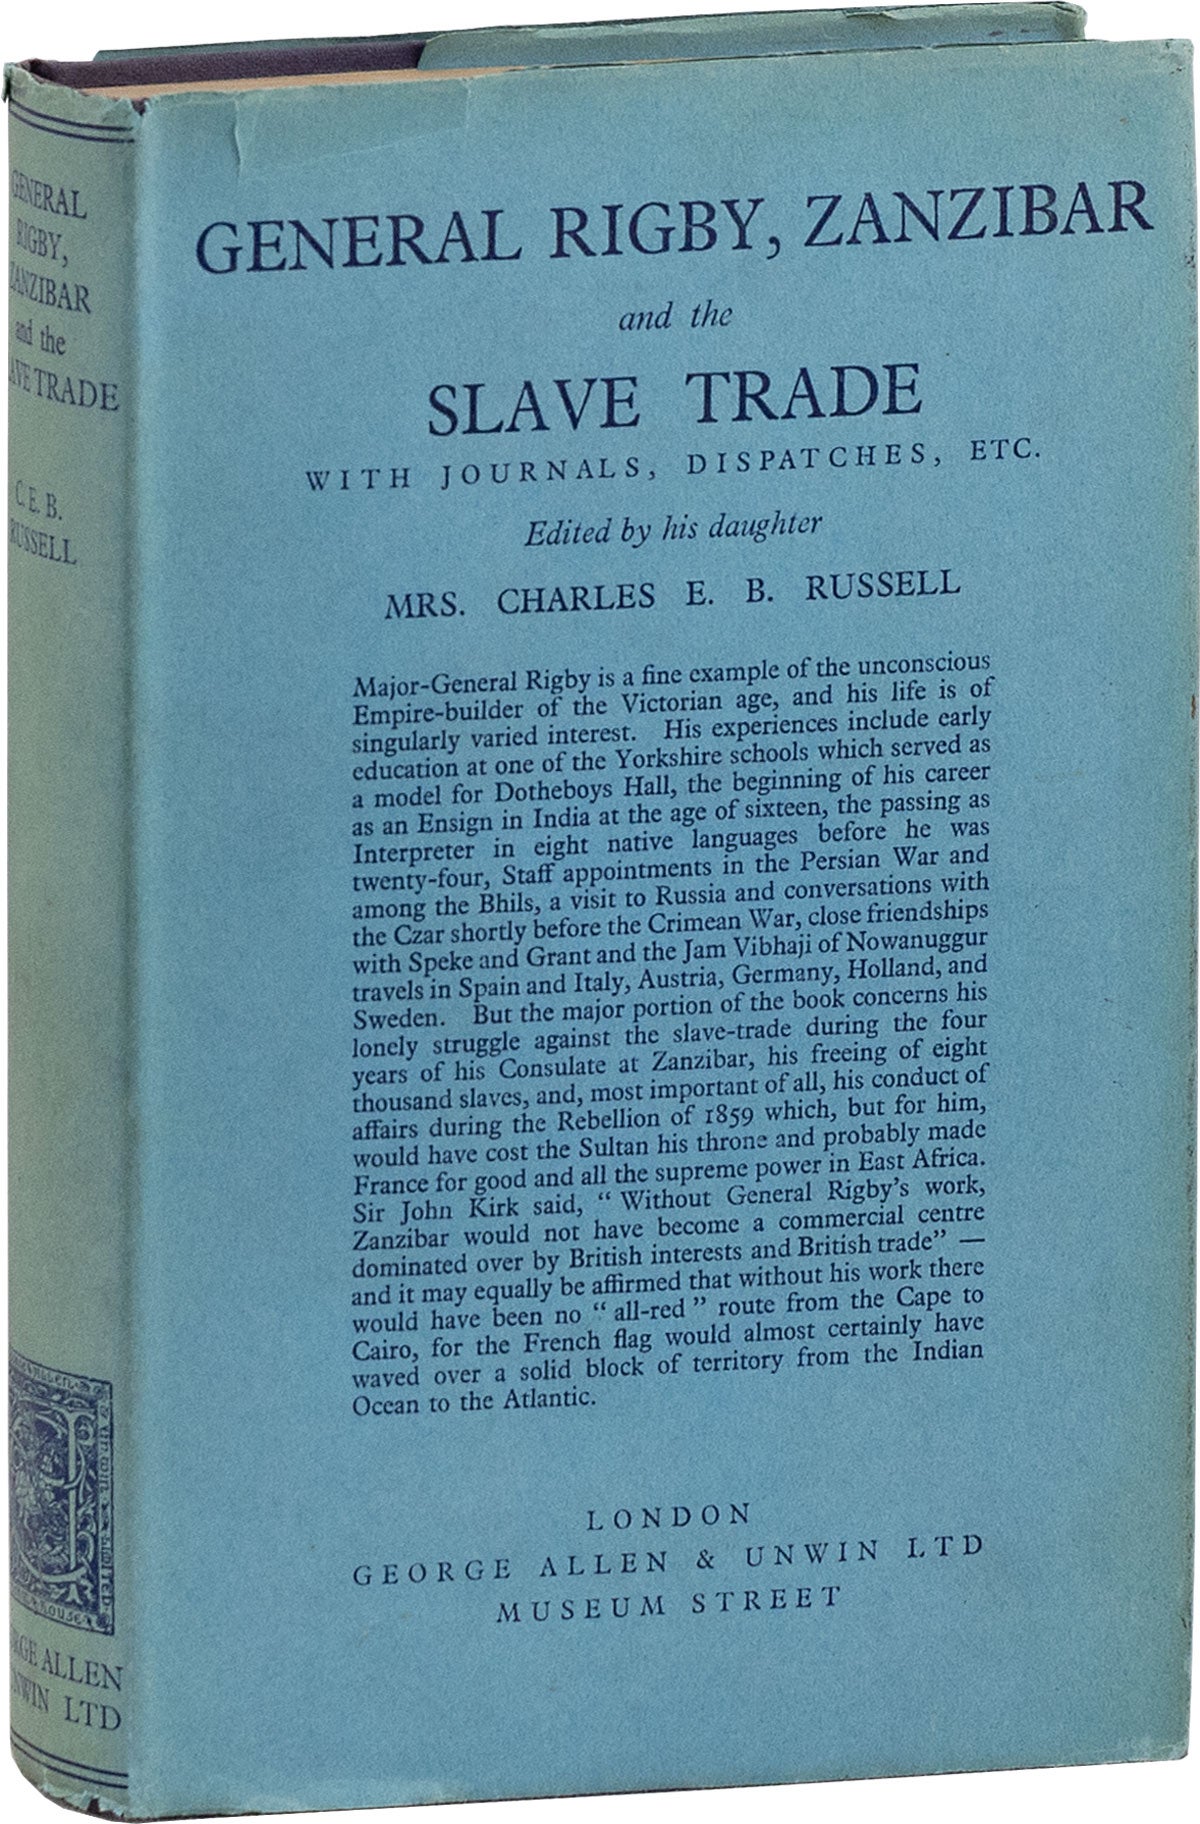 [Item #80736] General Rigby, Zanzibar and the Slave Trade, with Journals, Dispatches, etc. EAST AFRICA, SLAVERY, ABOLITION, Christopher Palmer RIGBY, ed Mrs. Charles E. B. Russell, Gen.